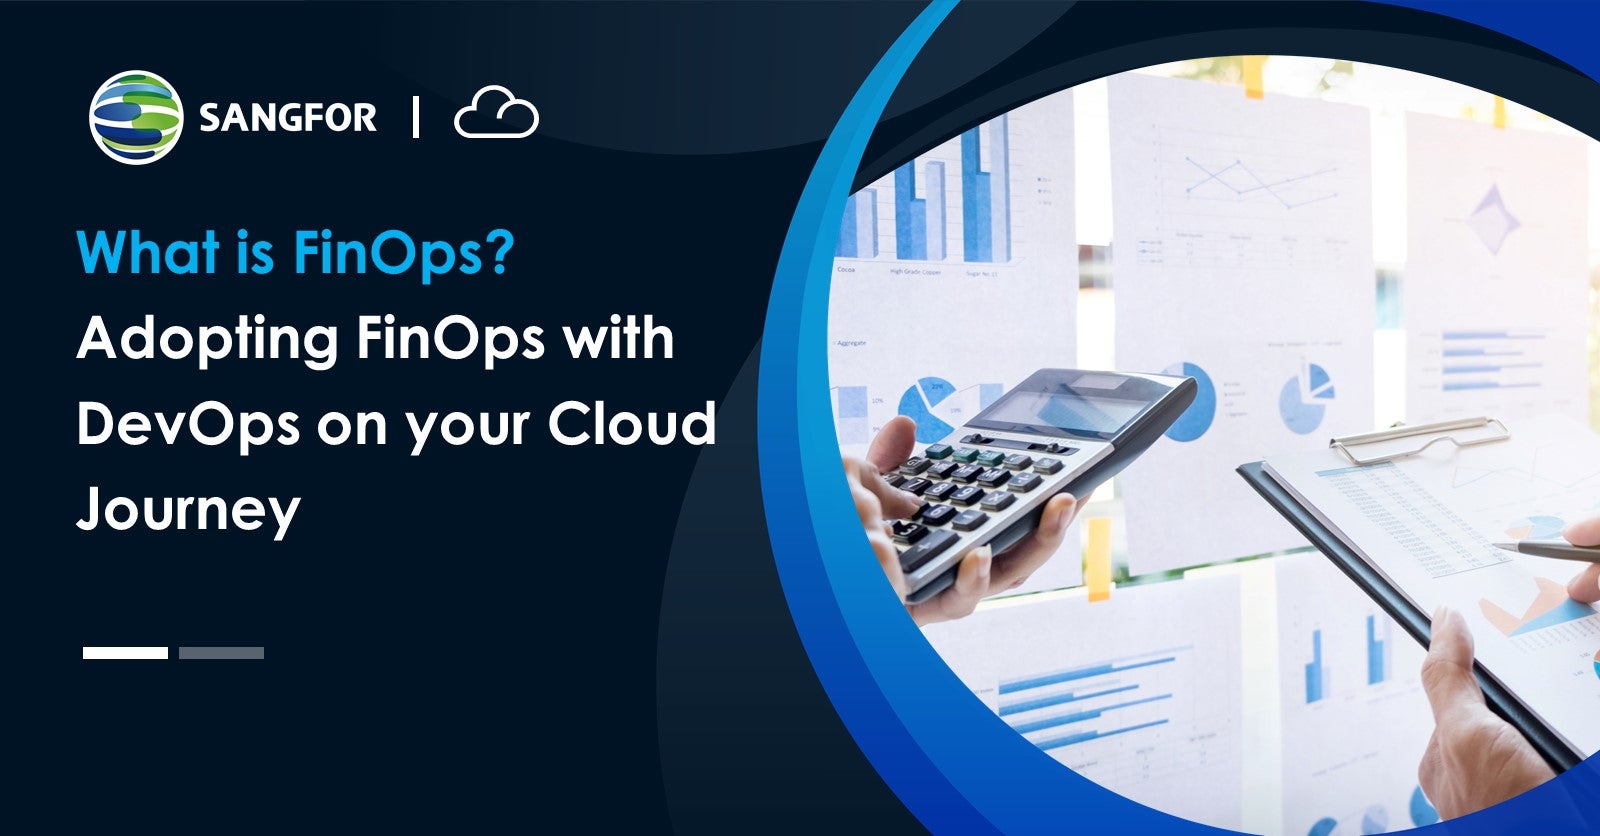 What is FinOps? Adopting FinOps with DevOps on Cloud Journey